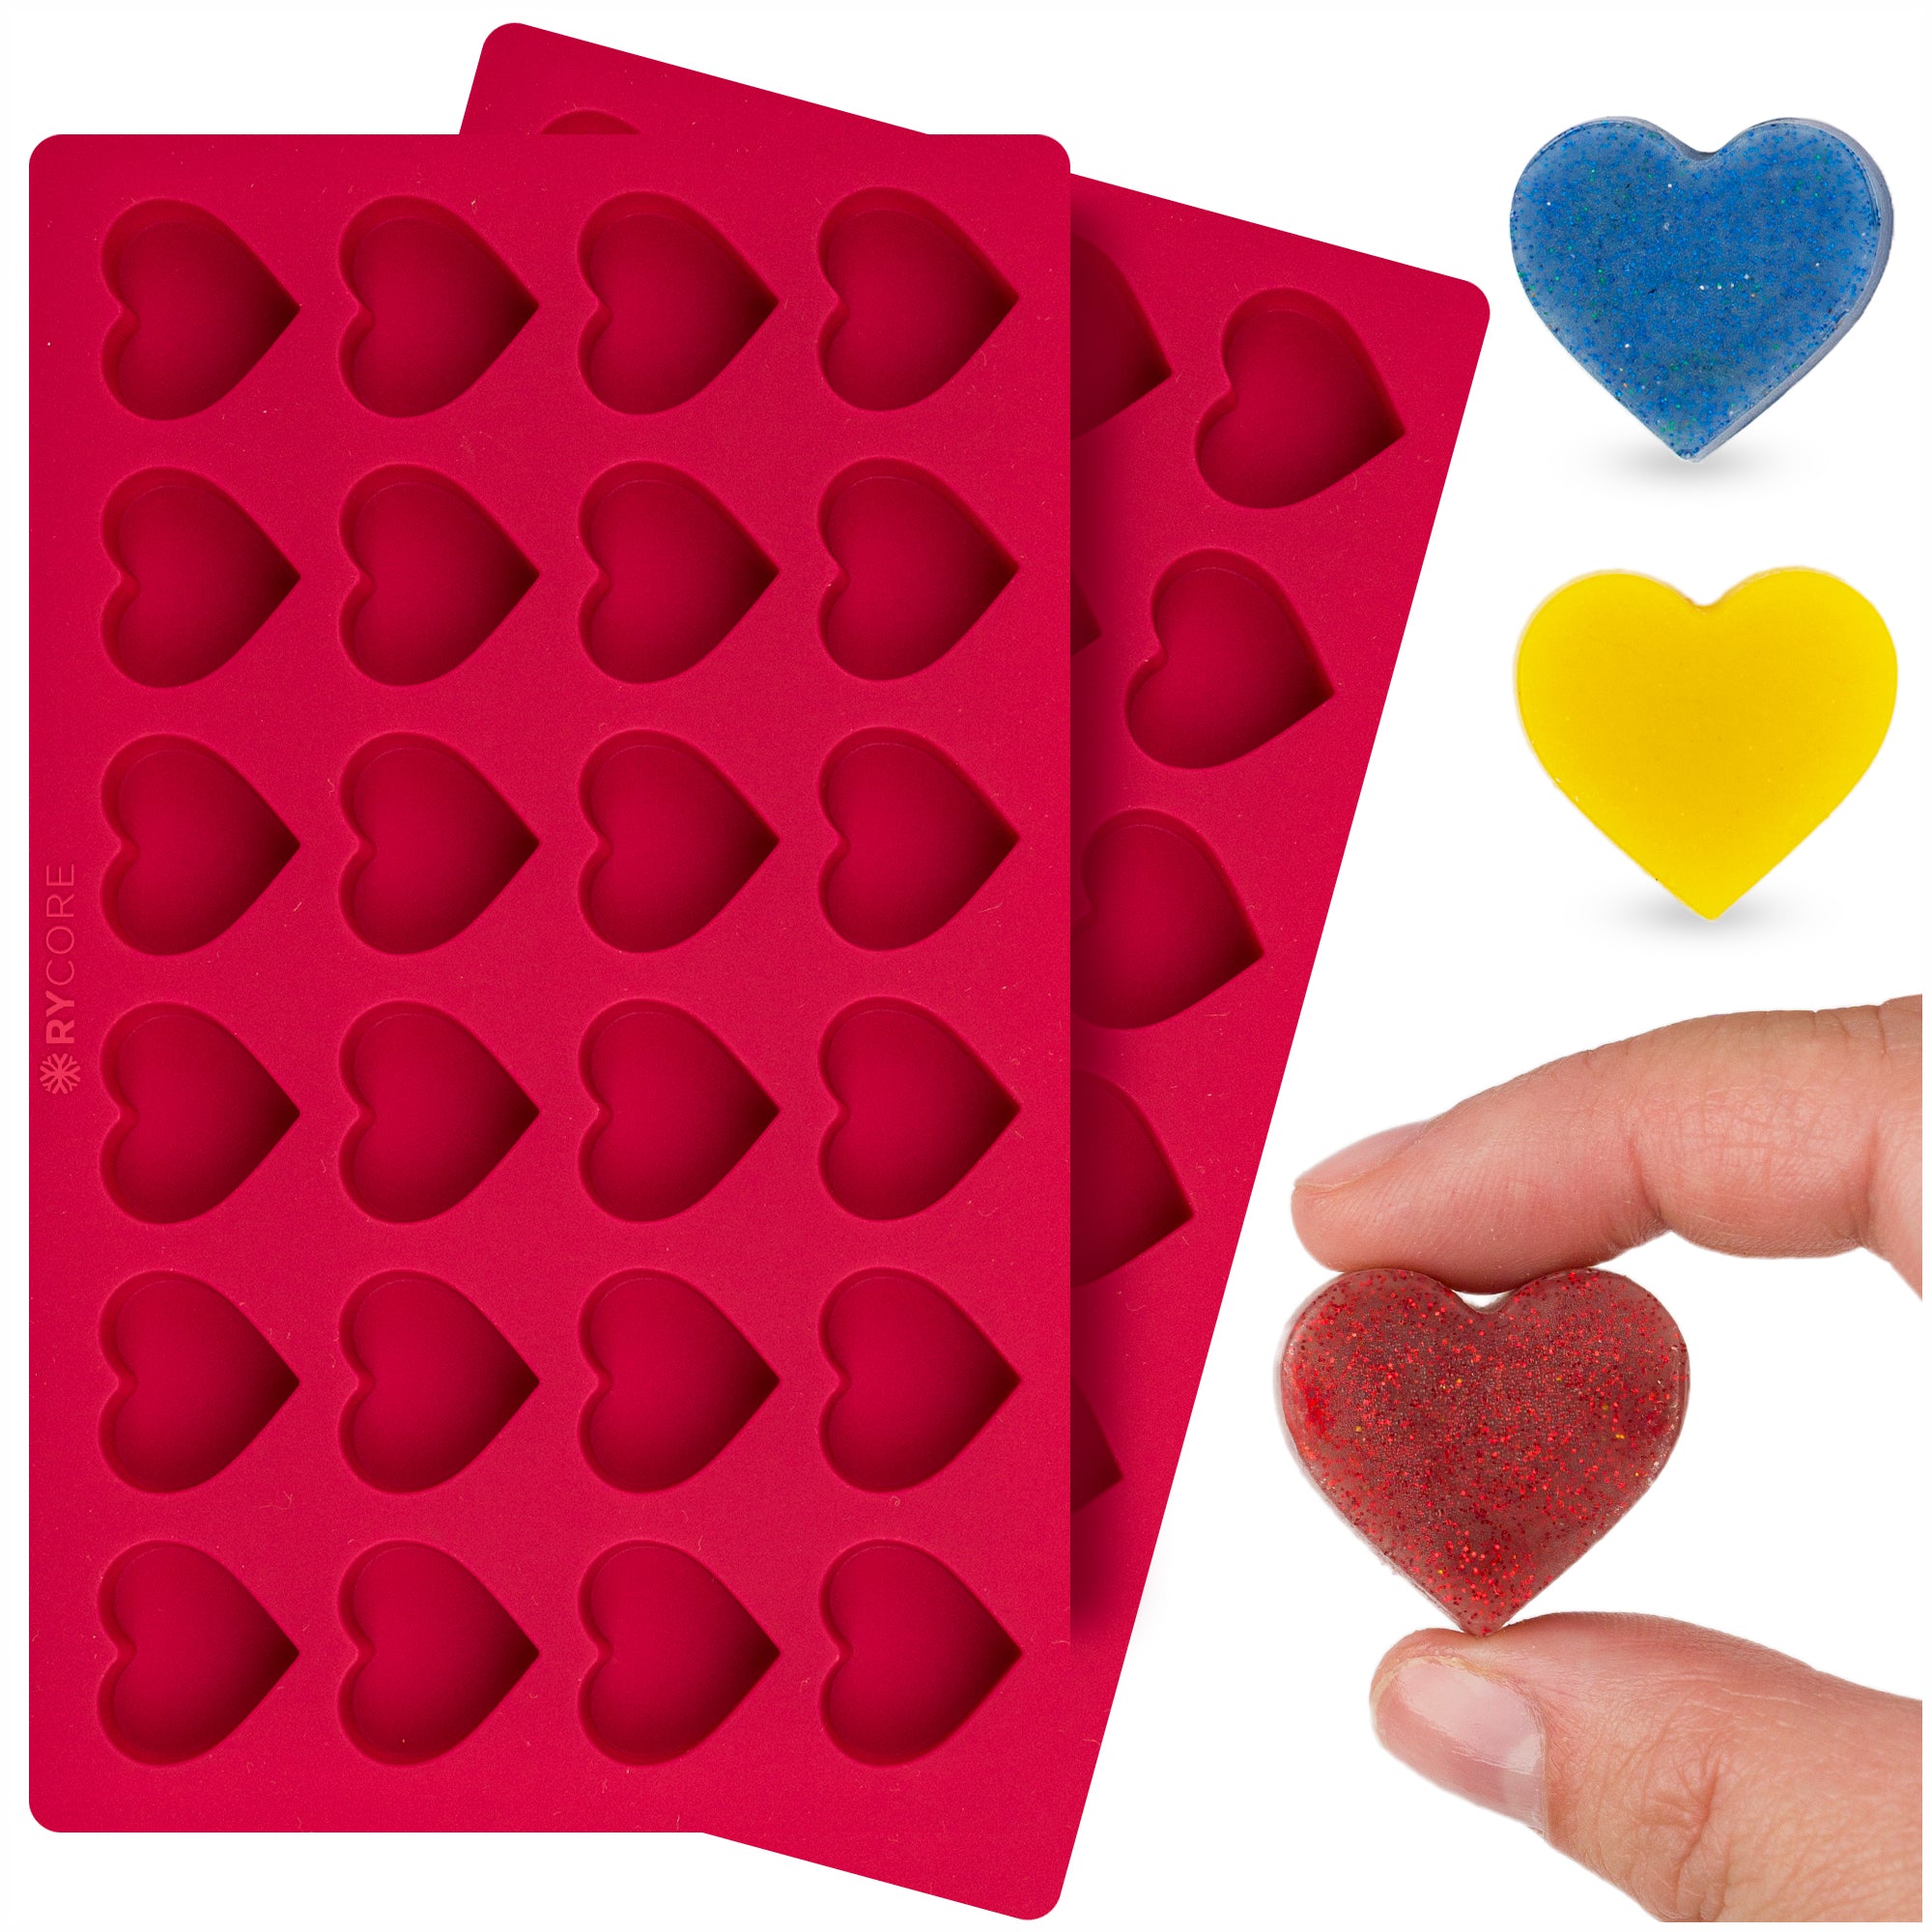 2 Pack - Silicone Heart Mold Design | Silicone Molds for Romantic Baking - Ideal for Crafting Chocolates, Candies & Love-Inspired Desserts - Heart Molds for Chocolate, Special Moments